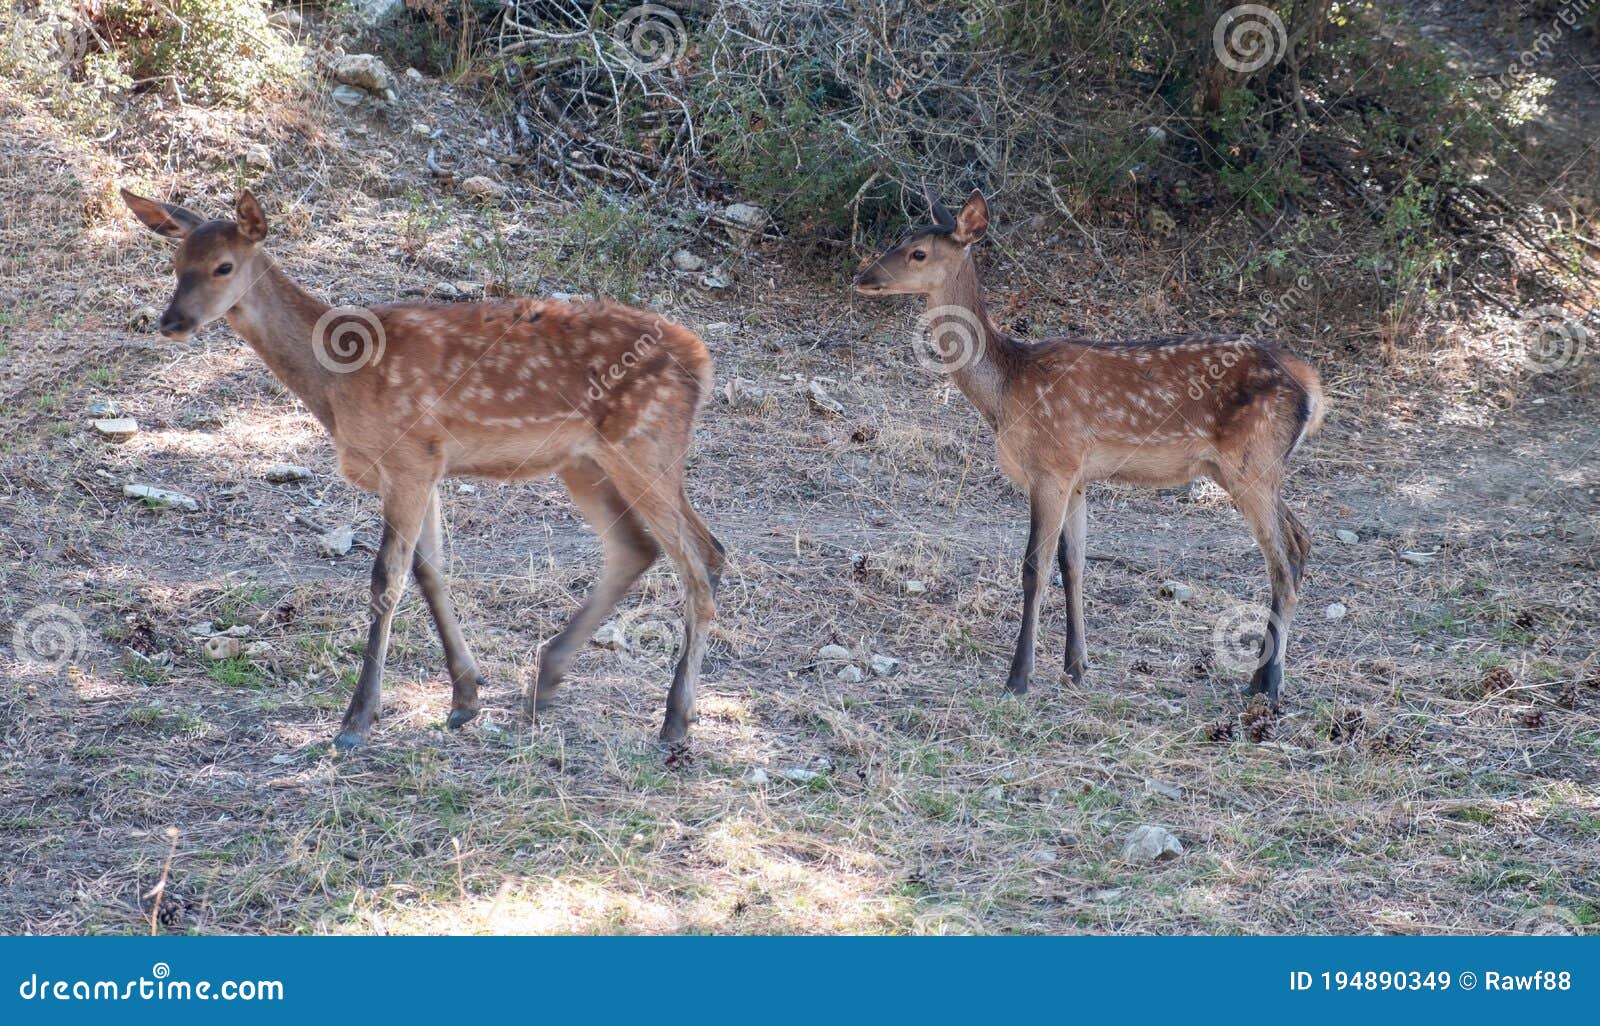 Two Wild Red Deer Fawns, Cervus Elaphus, at Parnitha Forest Mountain, Greece  Stock Image - Image of greece, grass: 194890349